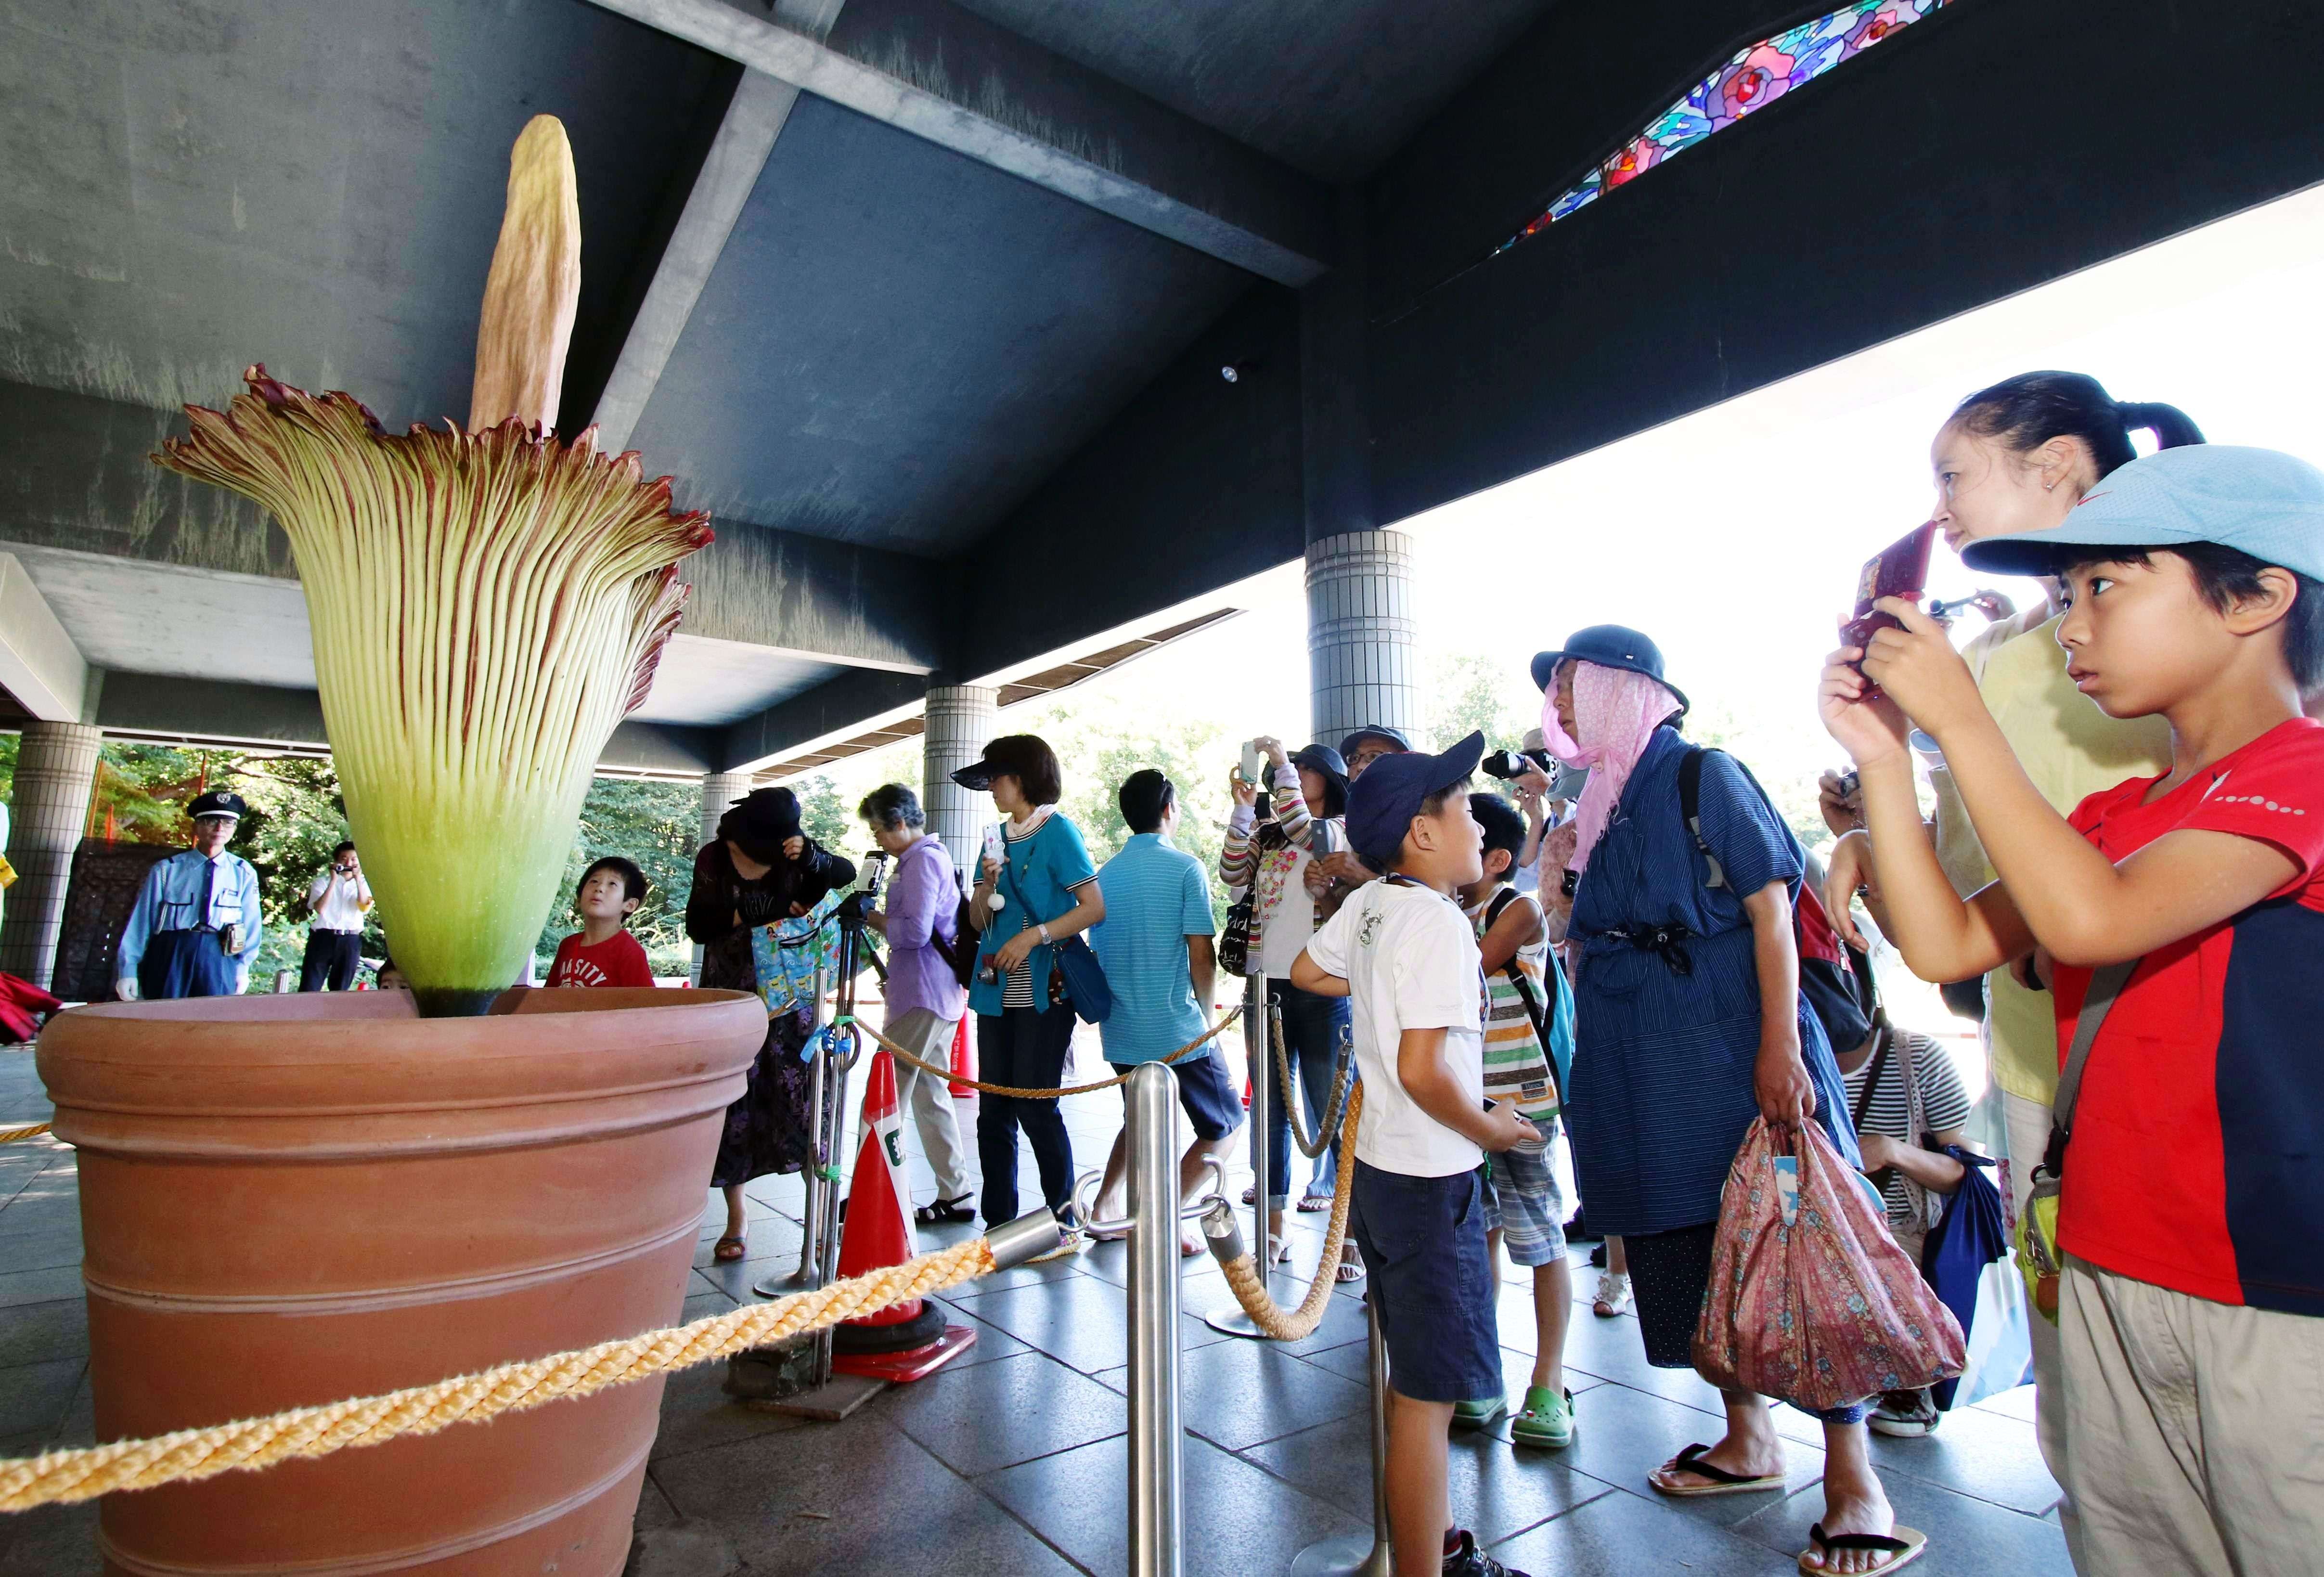 People admire a giant Titan Arum (Amorphophallus titanum) at the Jindai botanical gardens in Tokyo on July 22, 2015 after the flower started to bloom on July 21. The Indonesian plant has the world's largest blossom, standing 1.9 metres in height and smelling like decaying flesh to attract beetles. Hundreds of visitors queued to watch the rare flower which opens for only one or two days.   AFP PHOTO / Yoshikazu TSUNO